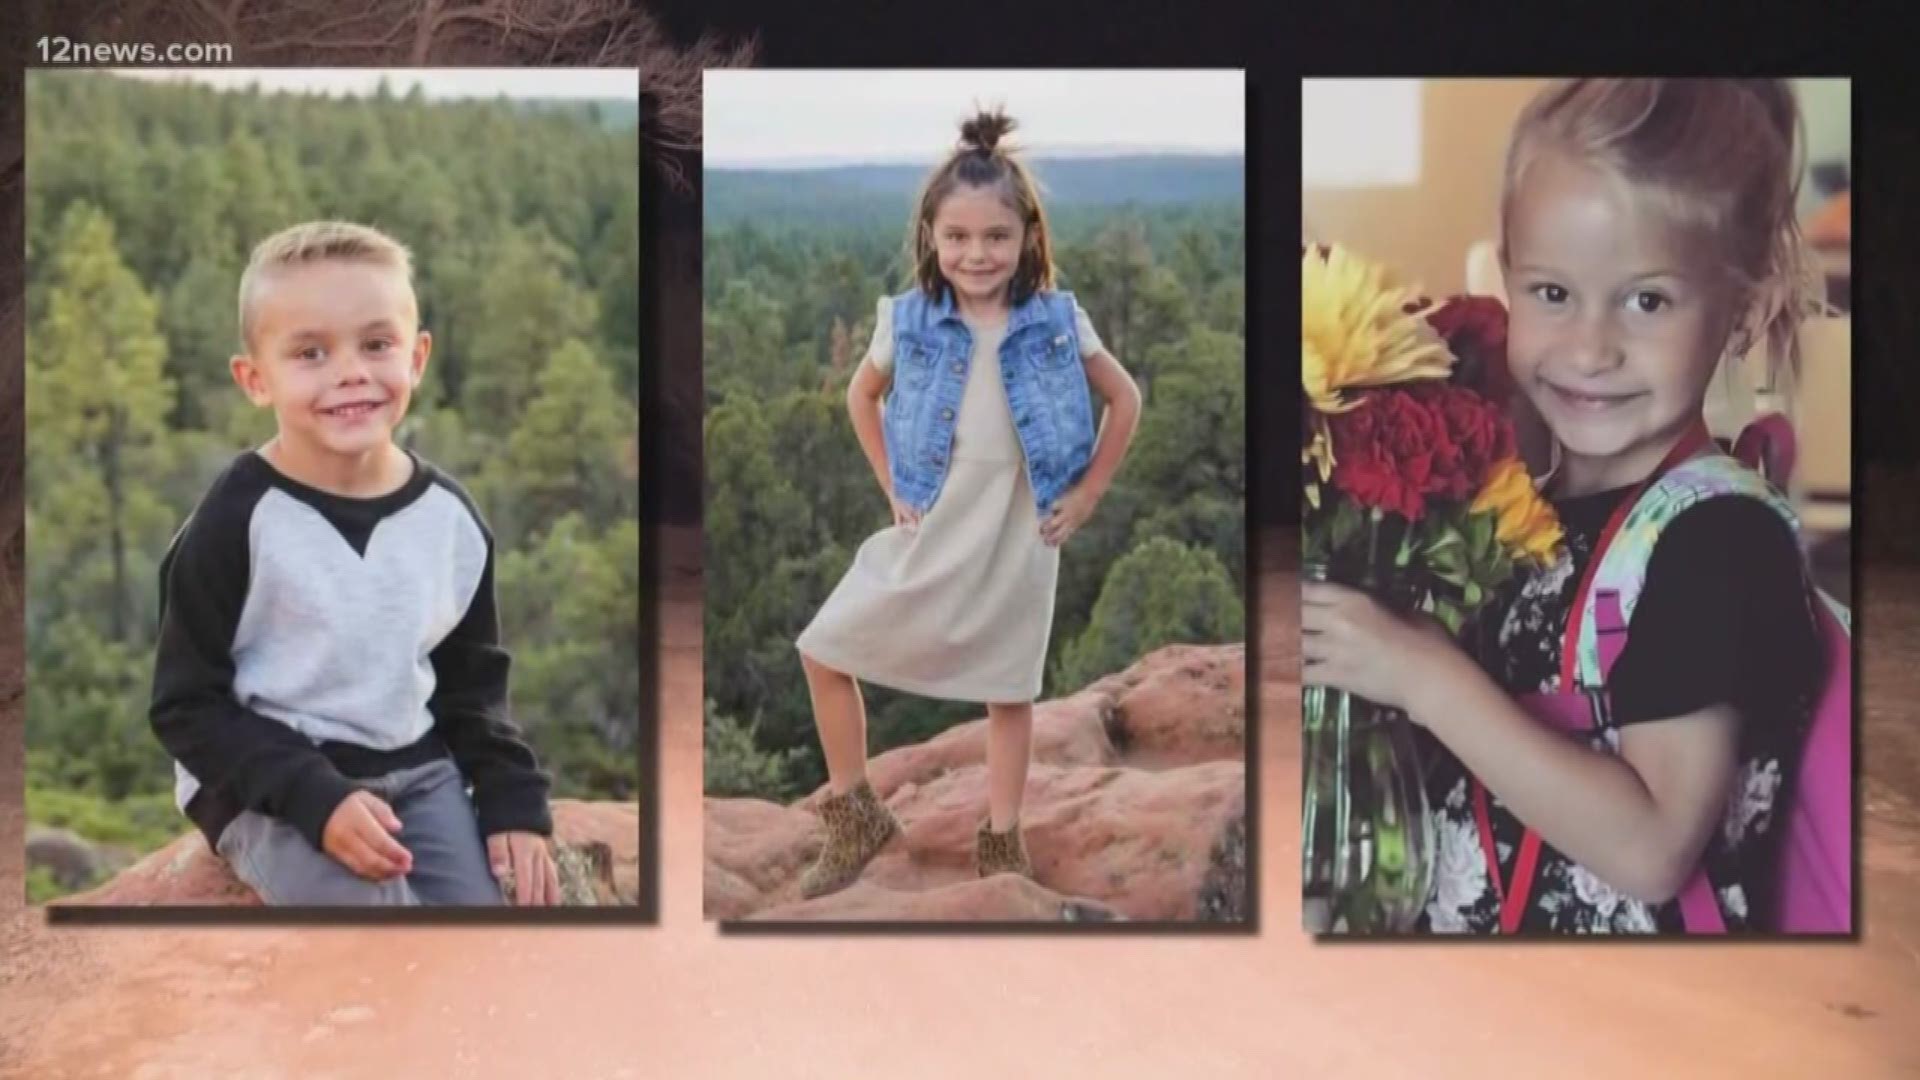 Three young children were swept away in Tonto Creek during a flood in 2019. The parents of two of the kids are now facing 17 felony charges.